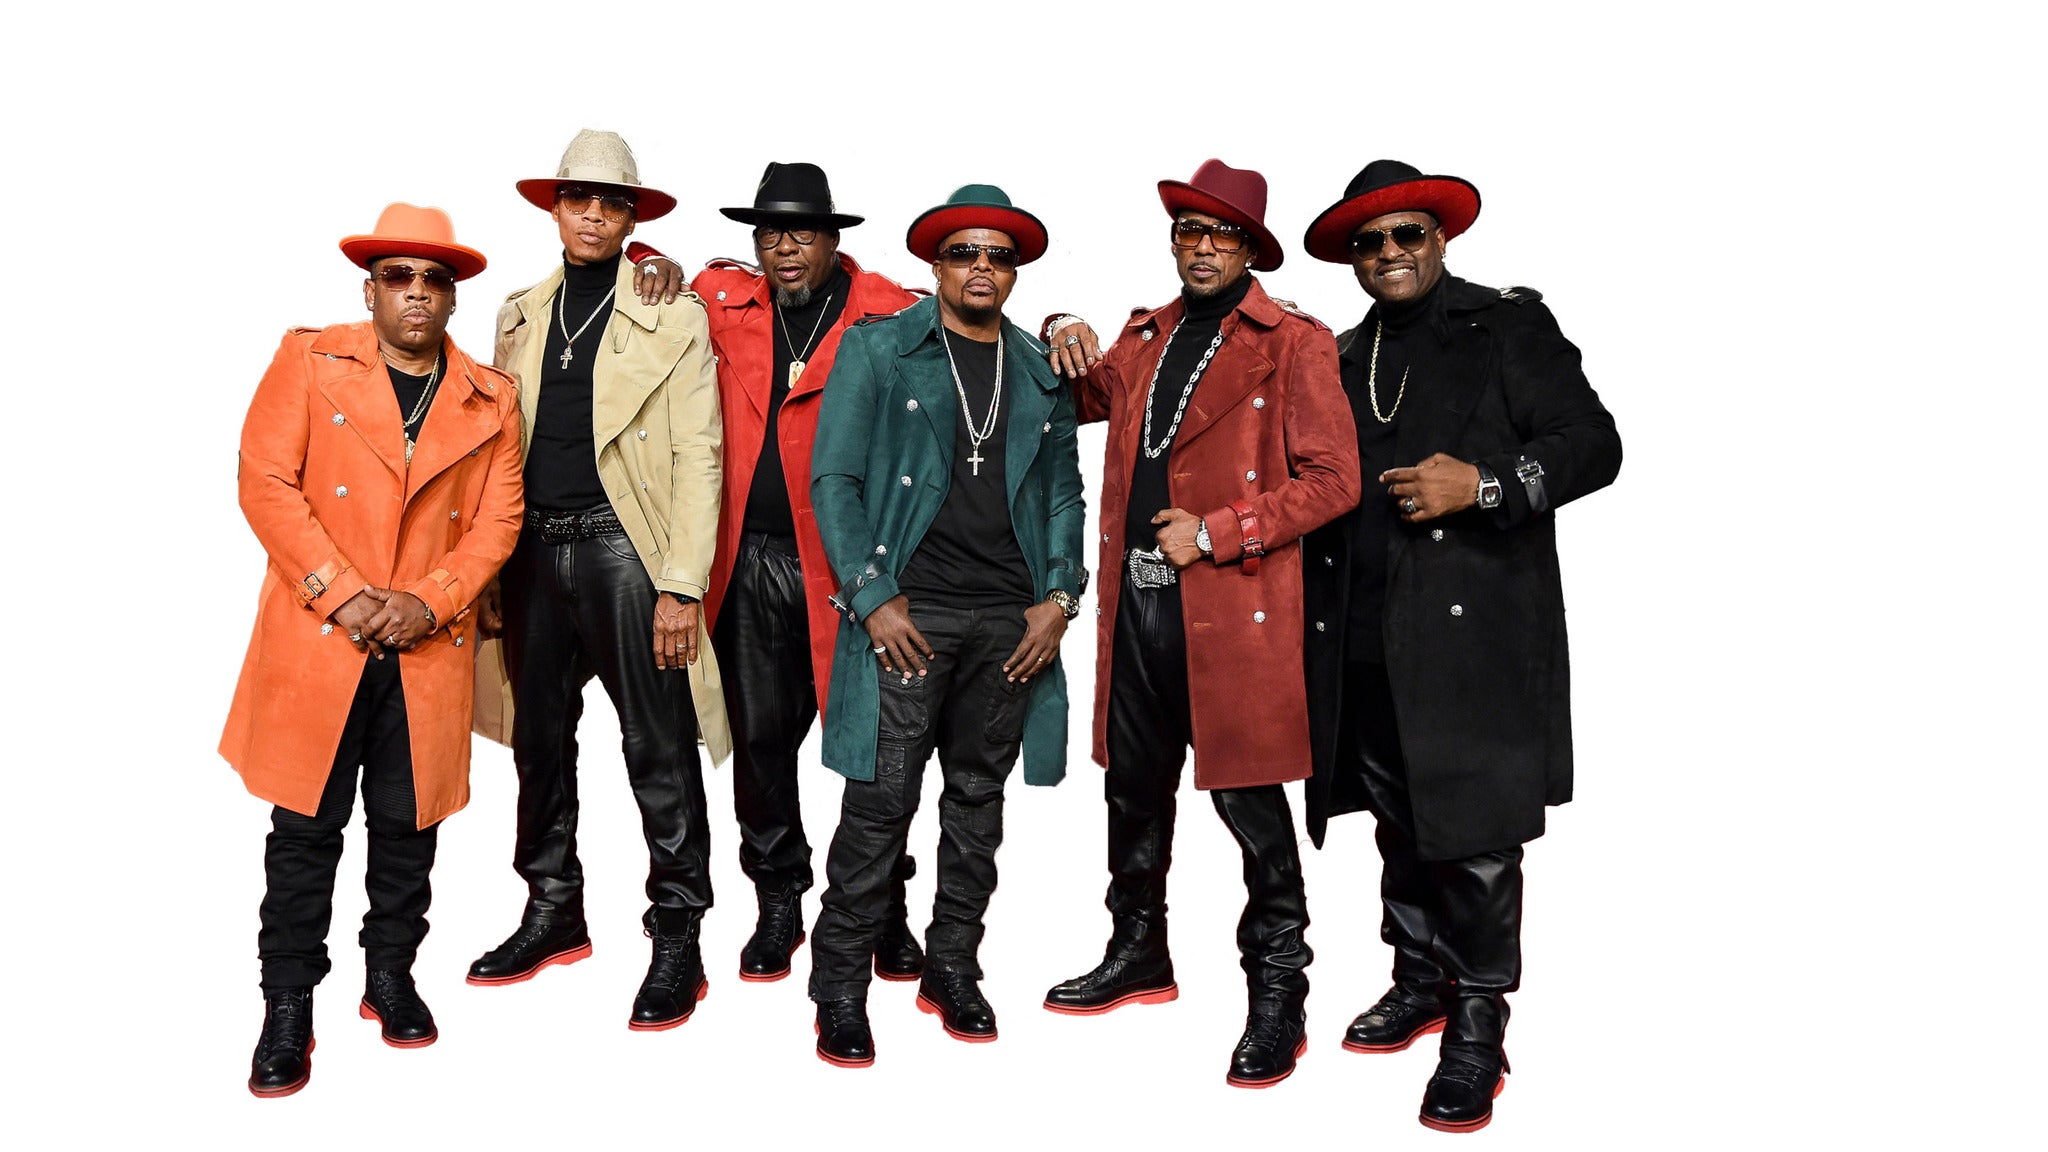 presale code for New Edition: The Culture Tour with Charlie Wilson + Jodeci tickets in Miami - FL (FTX Arena (formerly AmericanAirlines Arena))